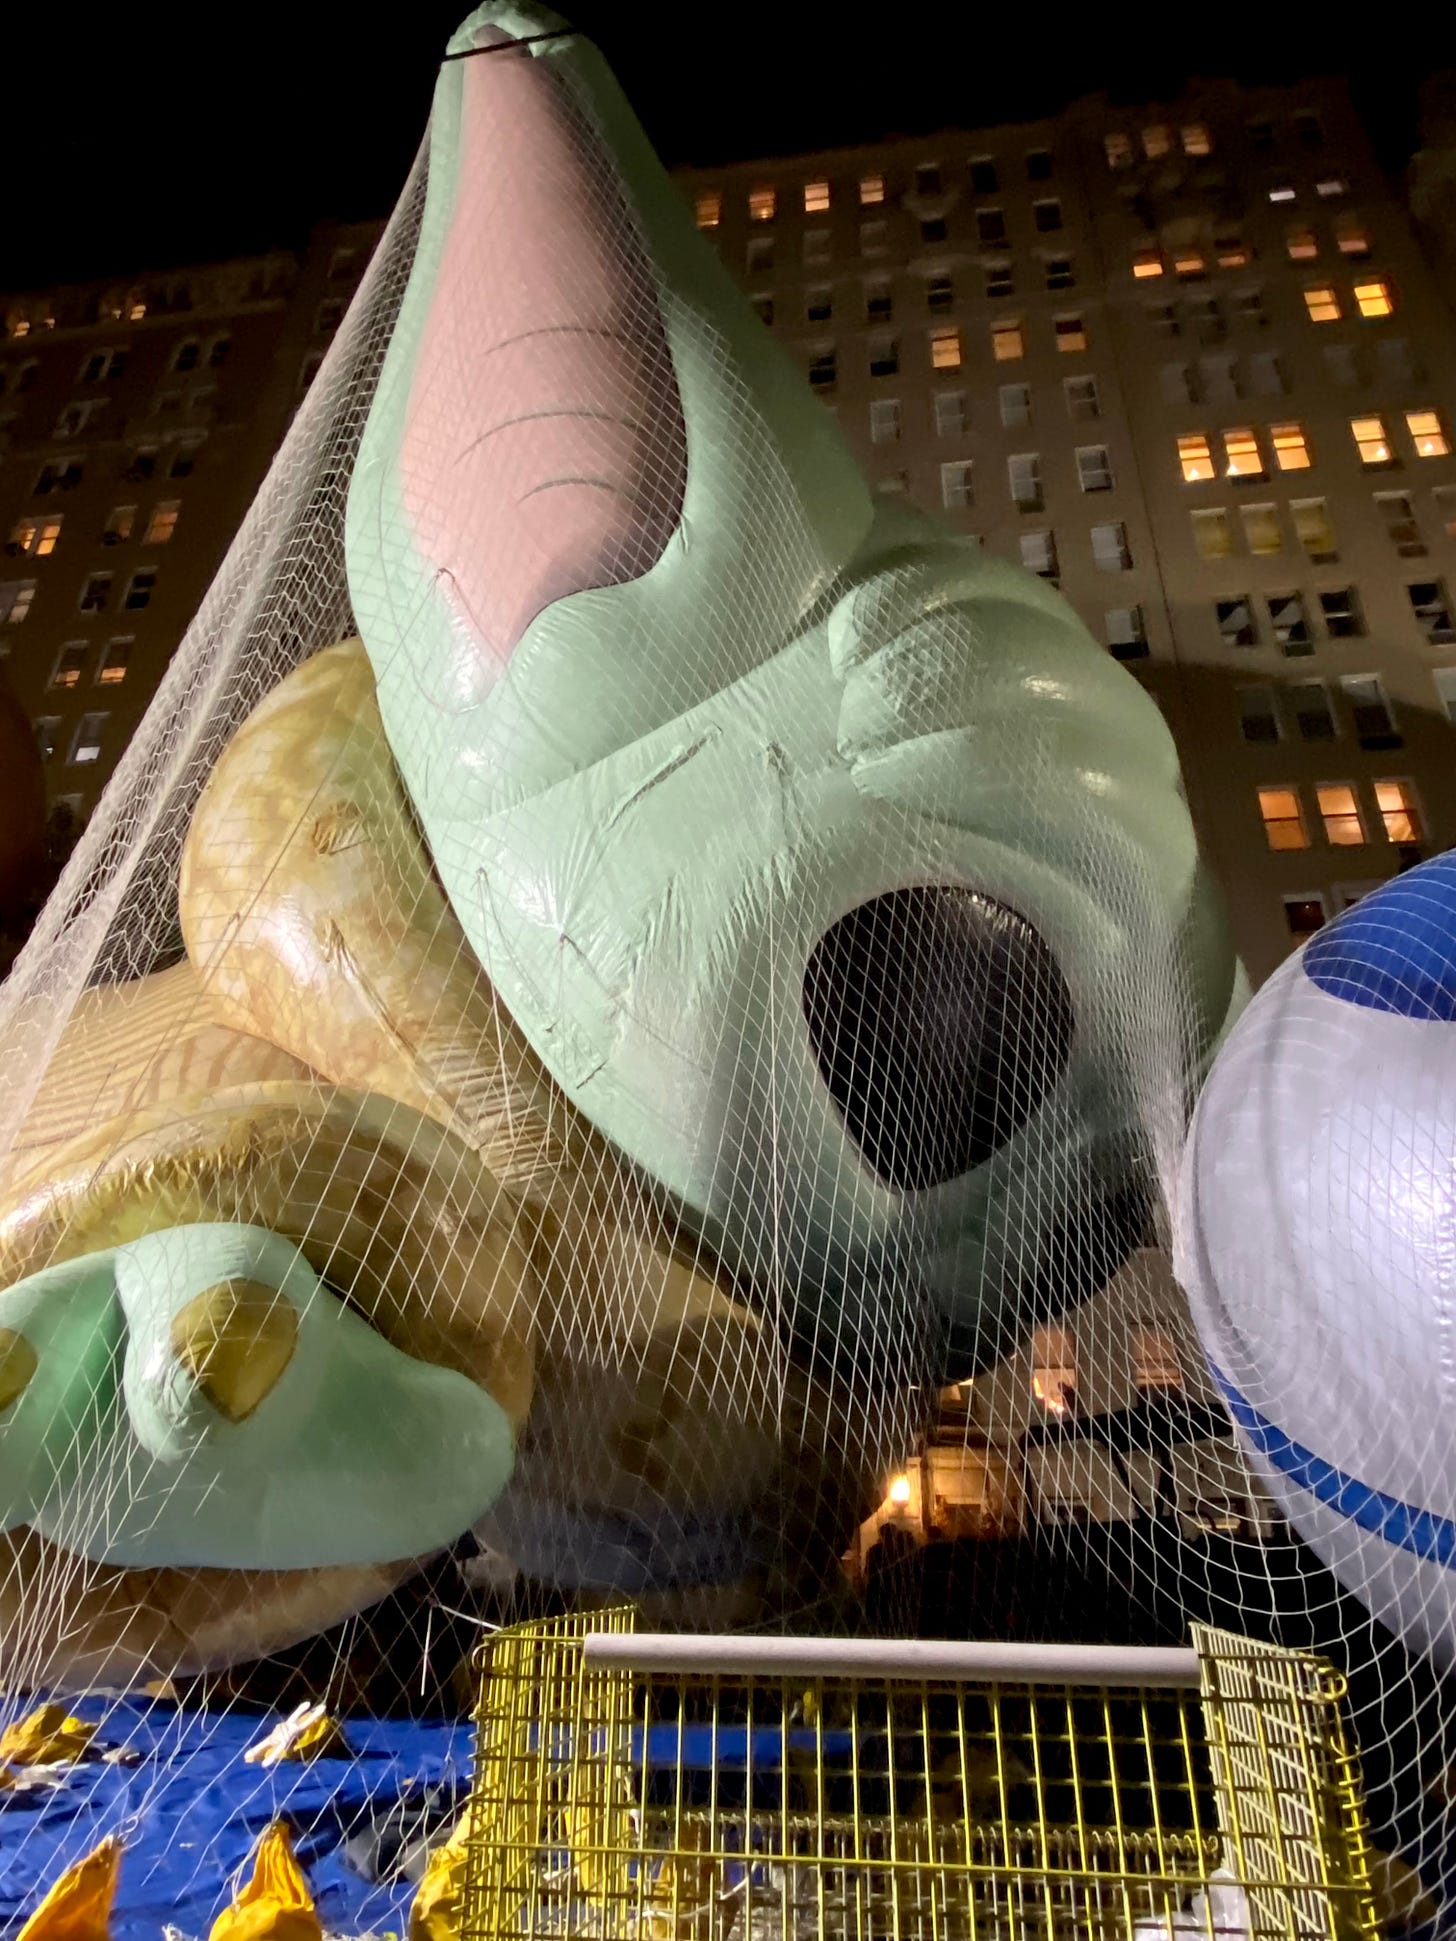 A Grogu balloon, netted down the night before the Macy's Thanksgiving Day Parade.